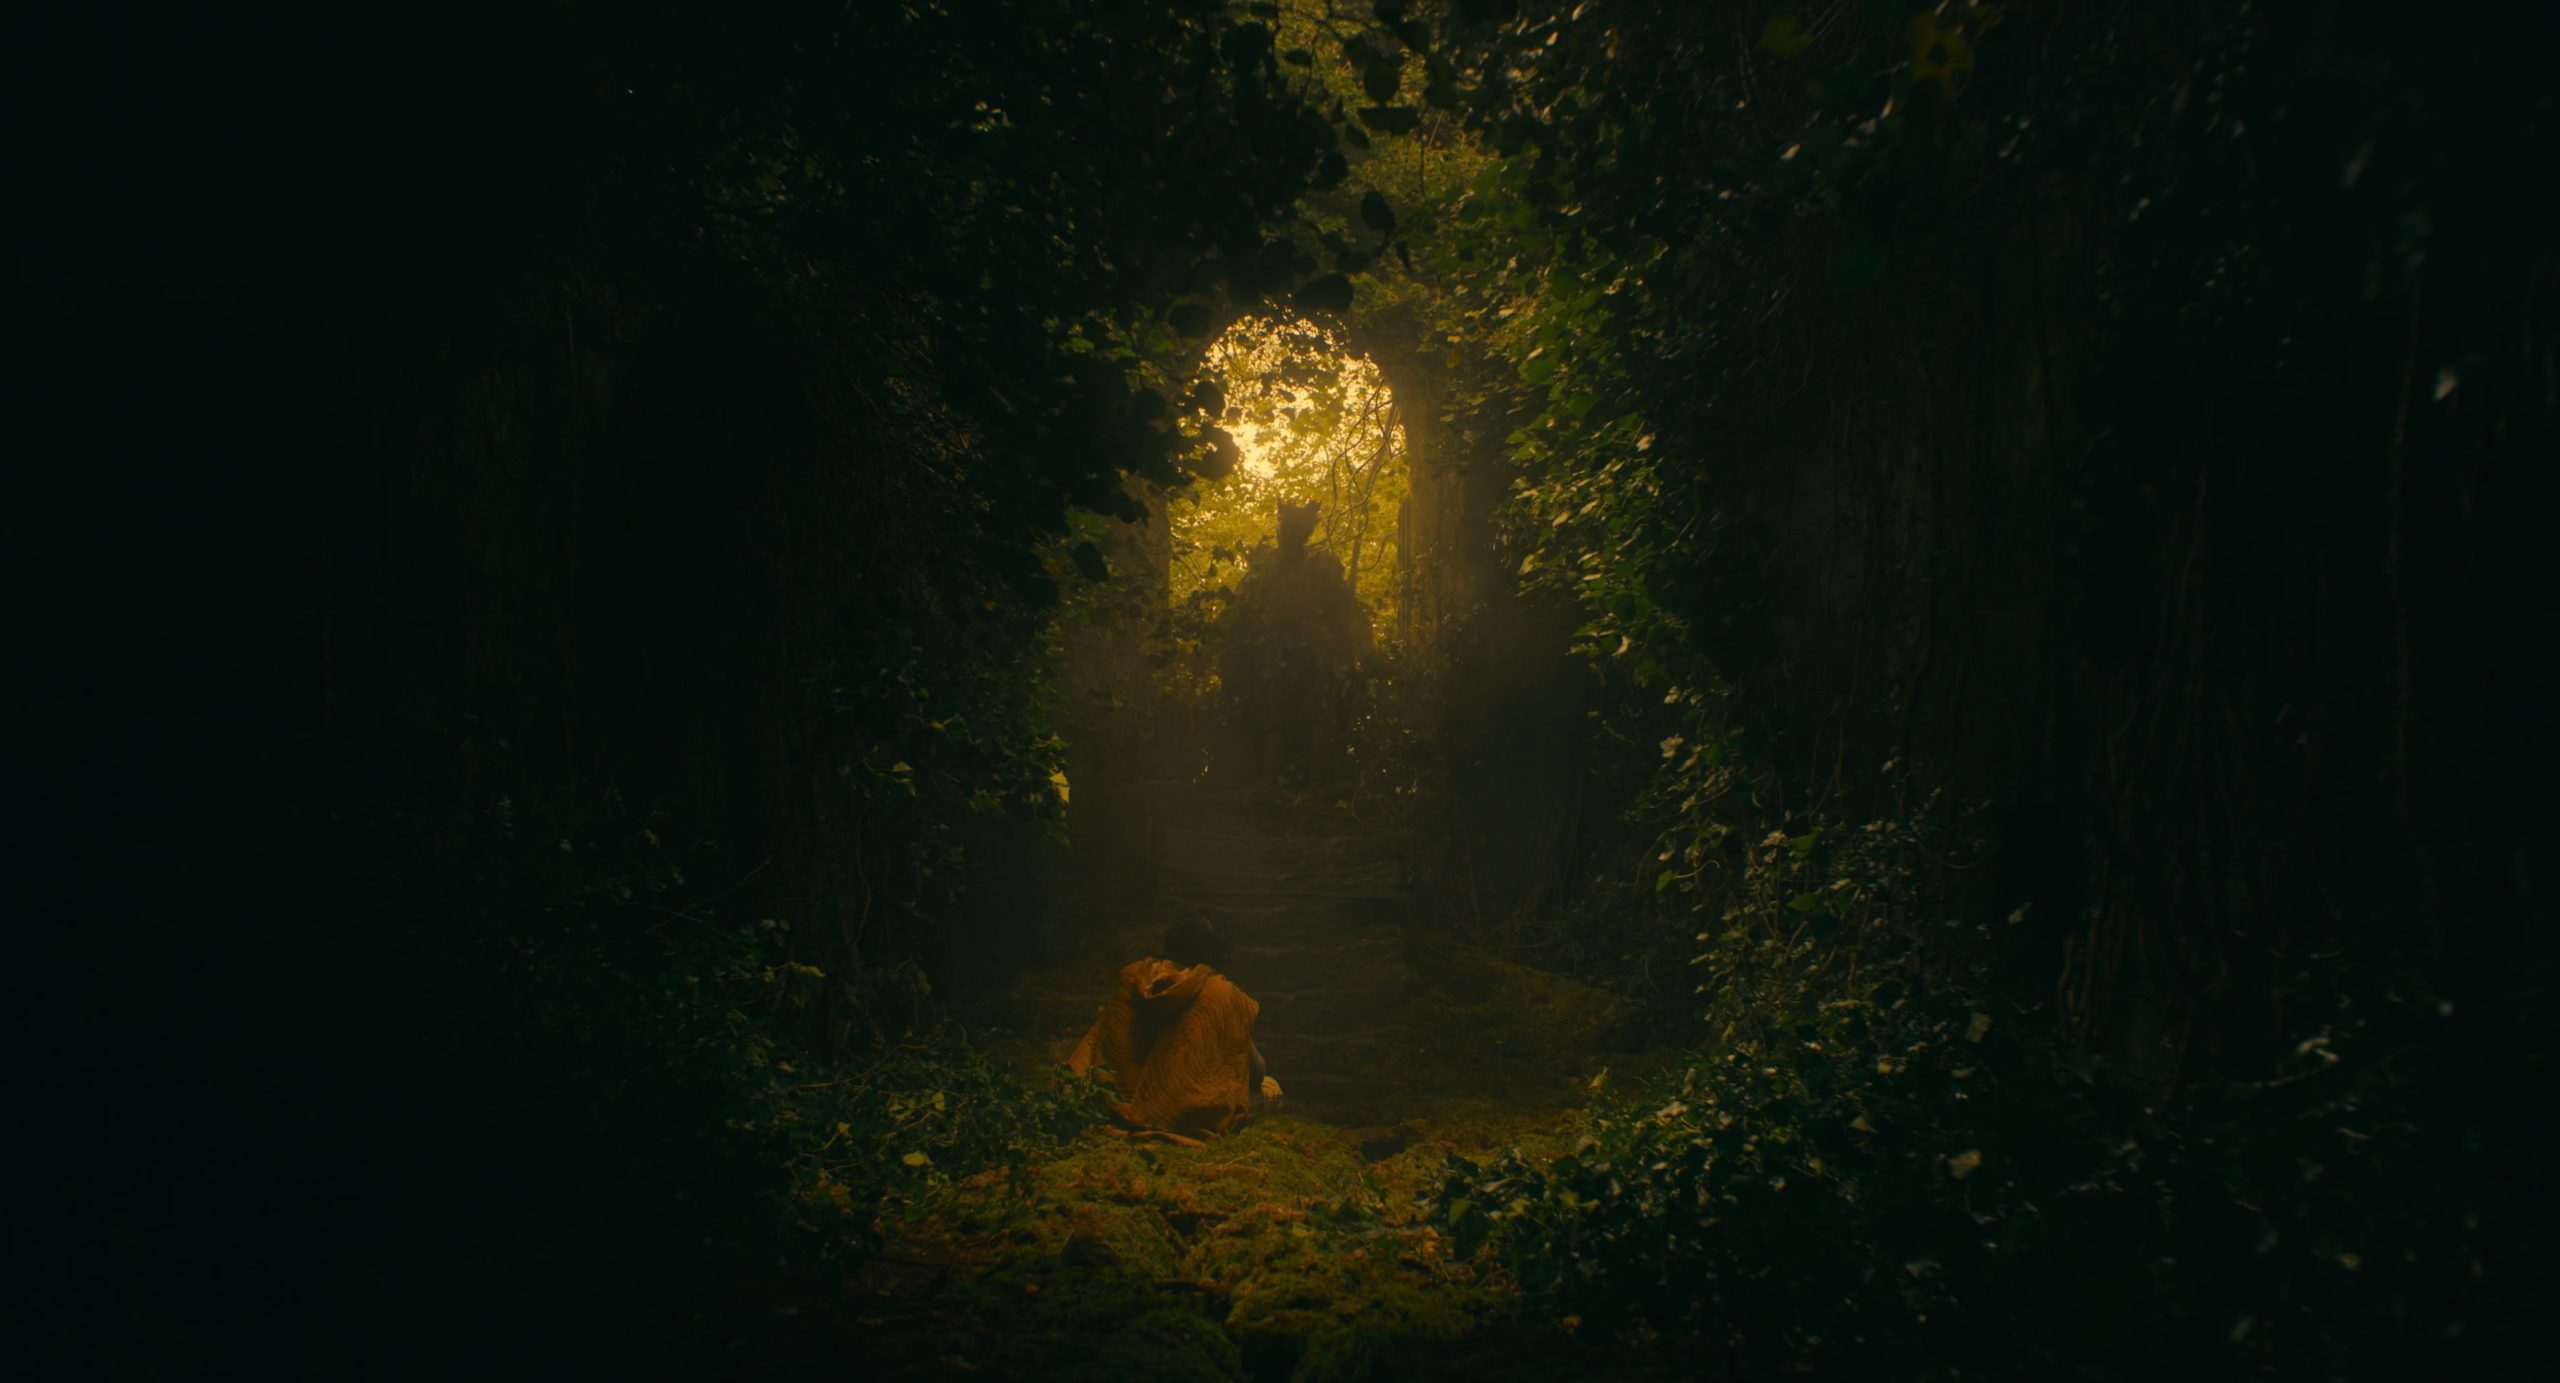 A screenshot from A24's Green Knight film. The left and right of the shot are dark, but framed in the center is dimly lit greenery forming a rough triangle. orange light comes in from a window in the background, silhouetting the Green Knight sitting in a throne and Gawain in the middle ground kneeling before him, back facing us.